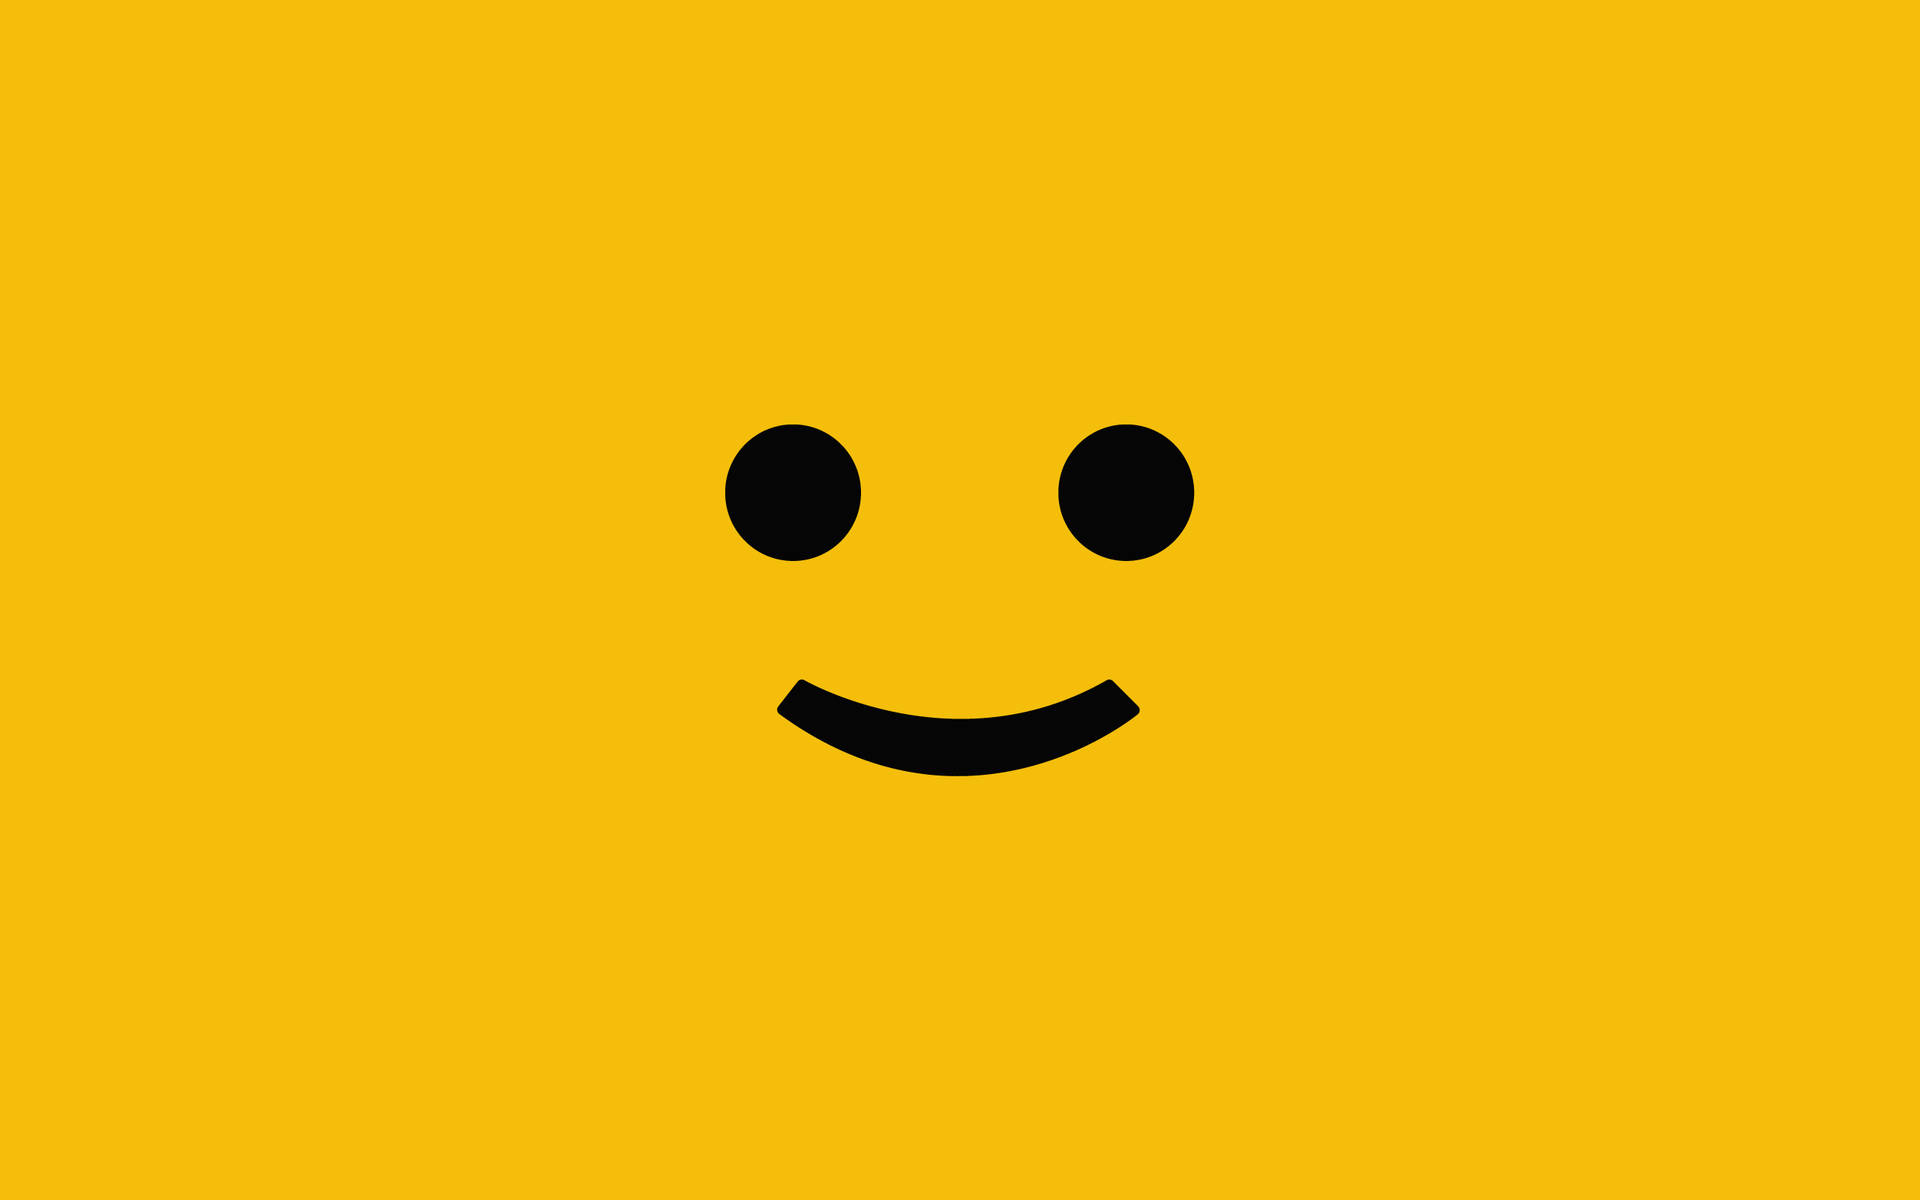 Lego Classic Smile Face Yellow Background SVG